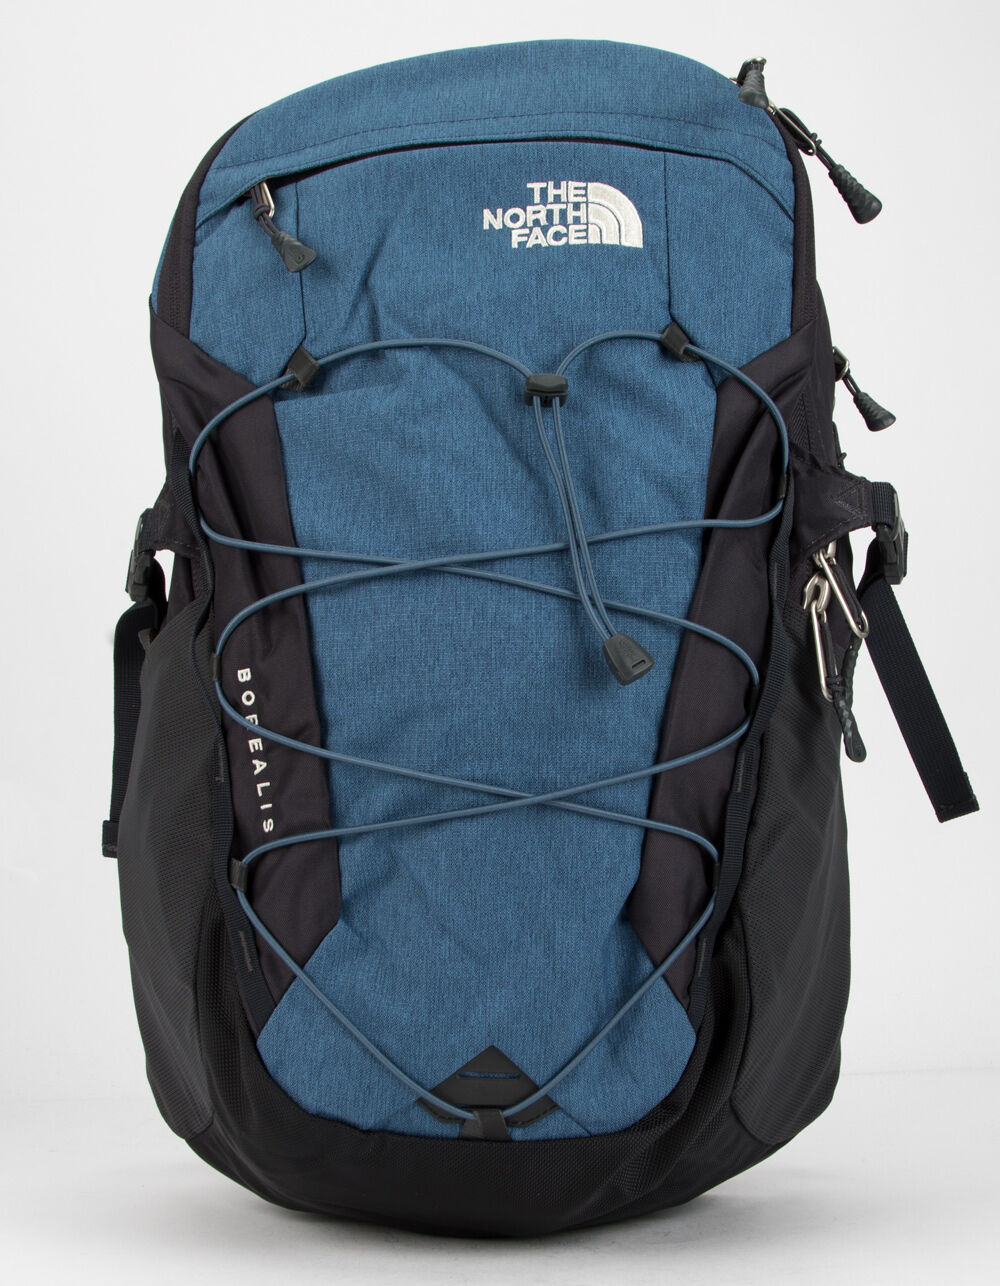 THE NORTH FACE Blue Borealis Backpack - BLUE | Tillys